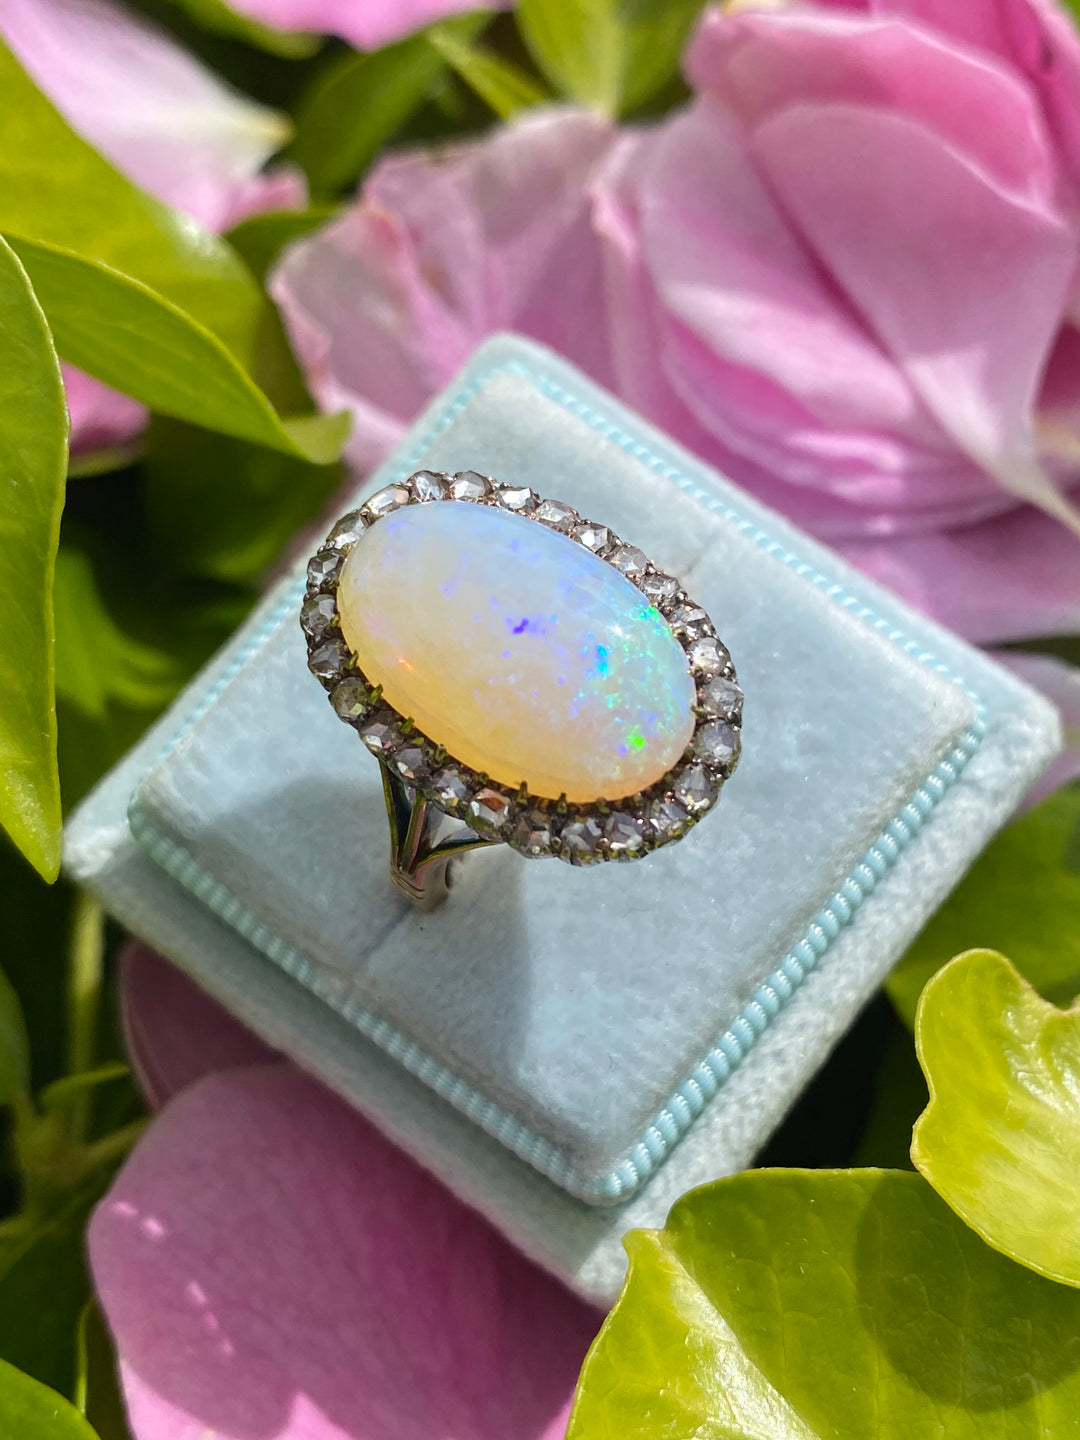 Antique Victorian White Opal and Old Euro Cut Diamond halo cocktail ring in Gold 